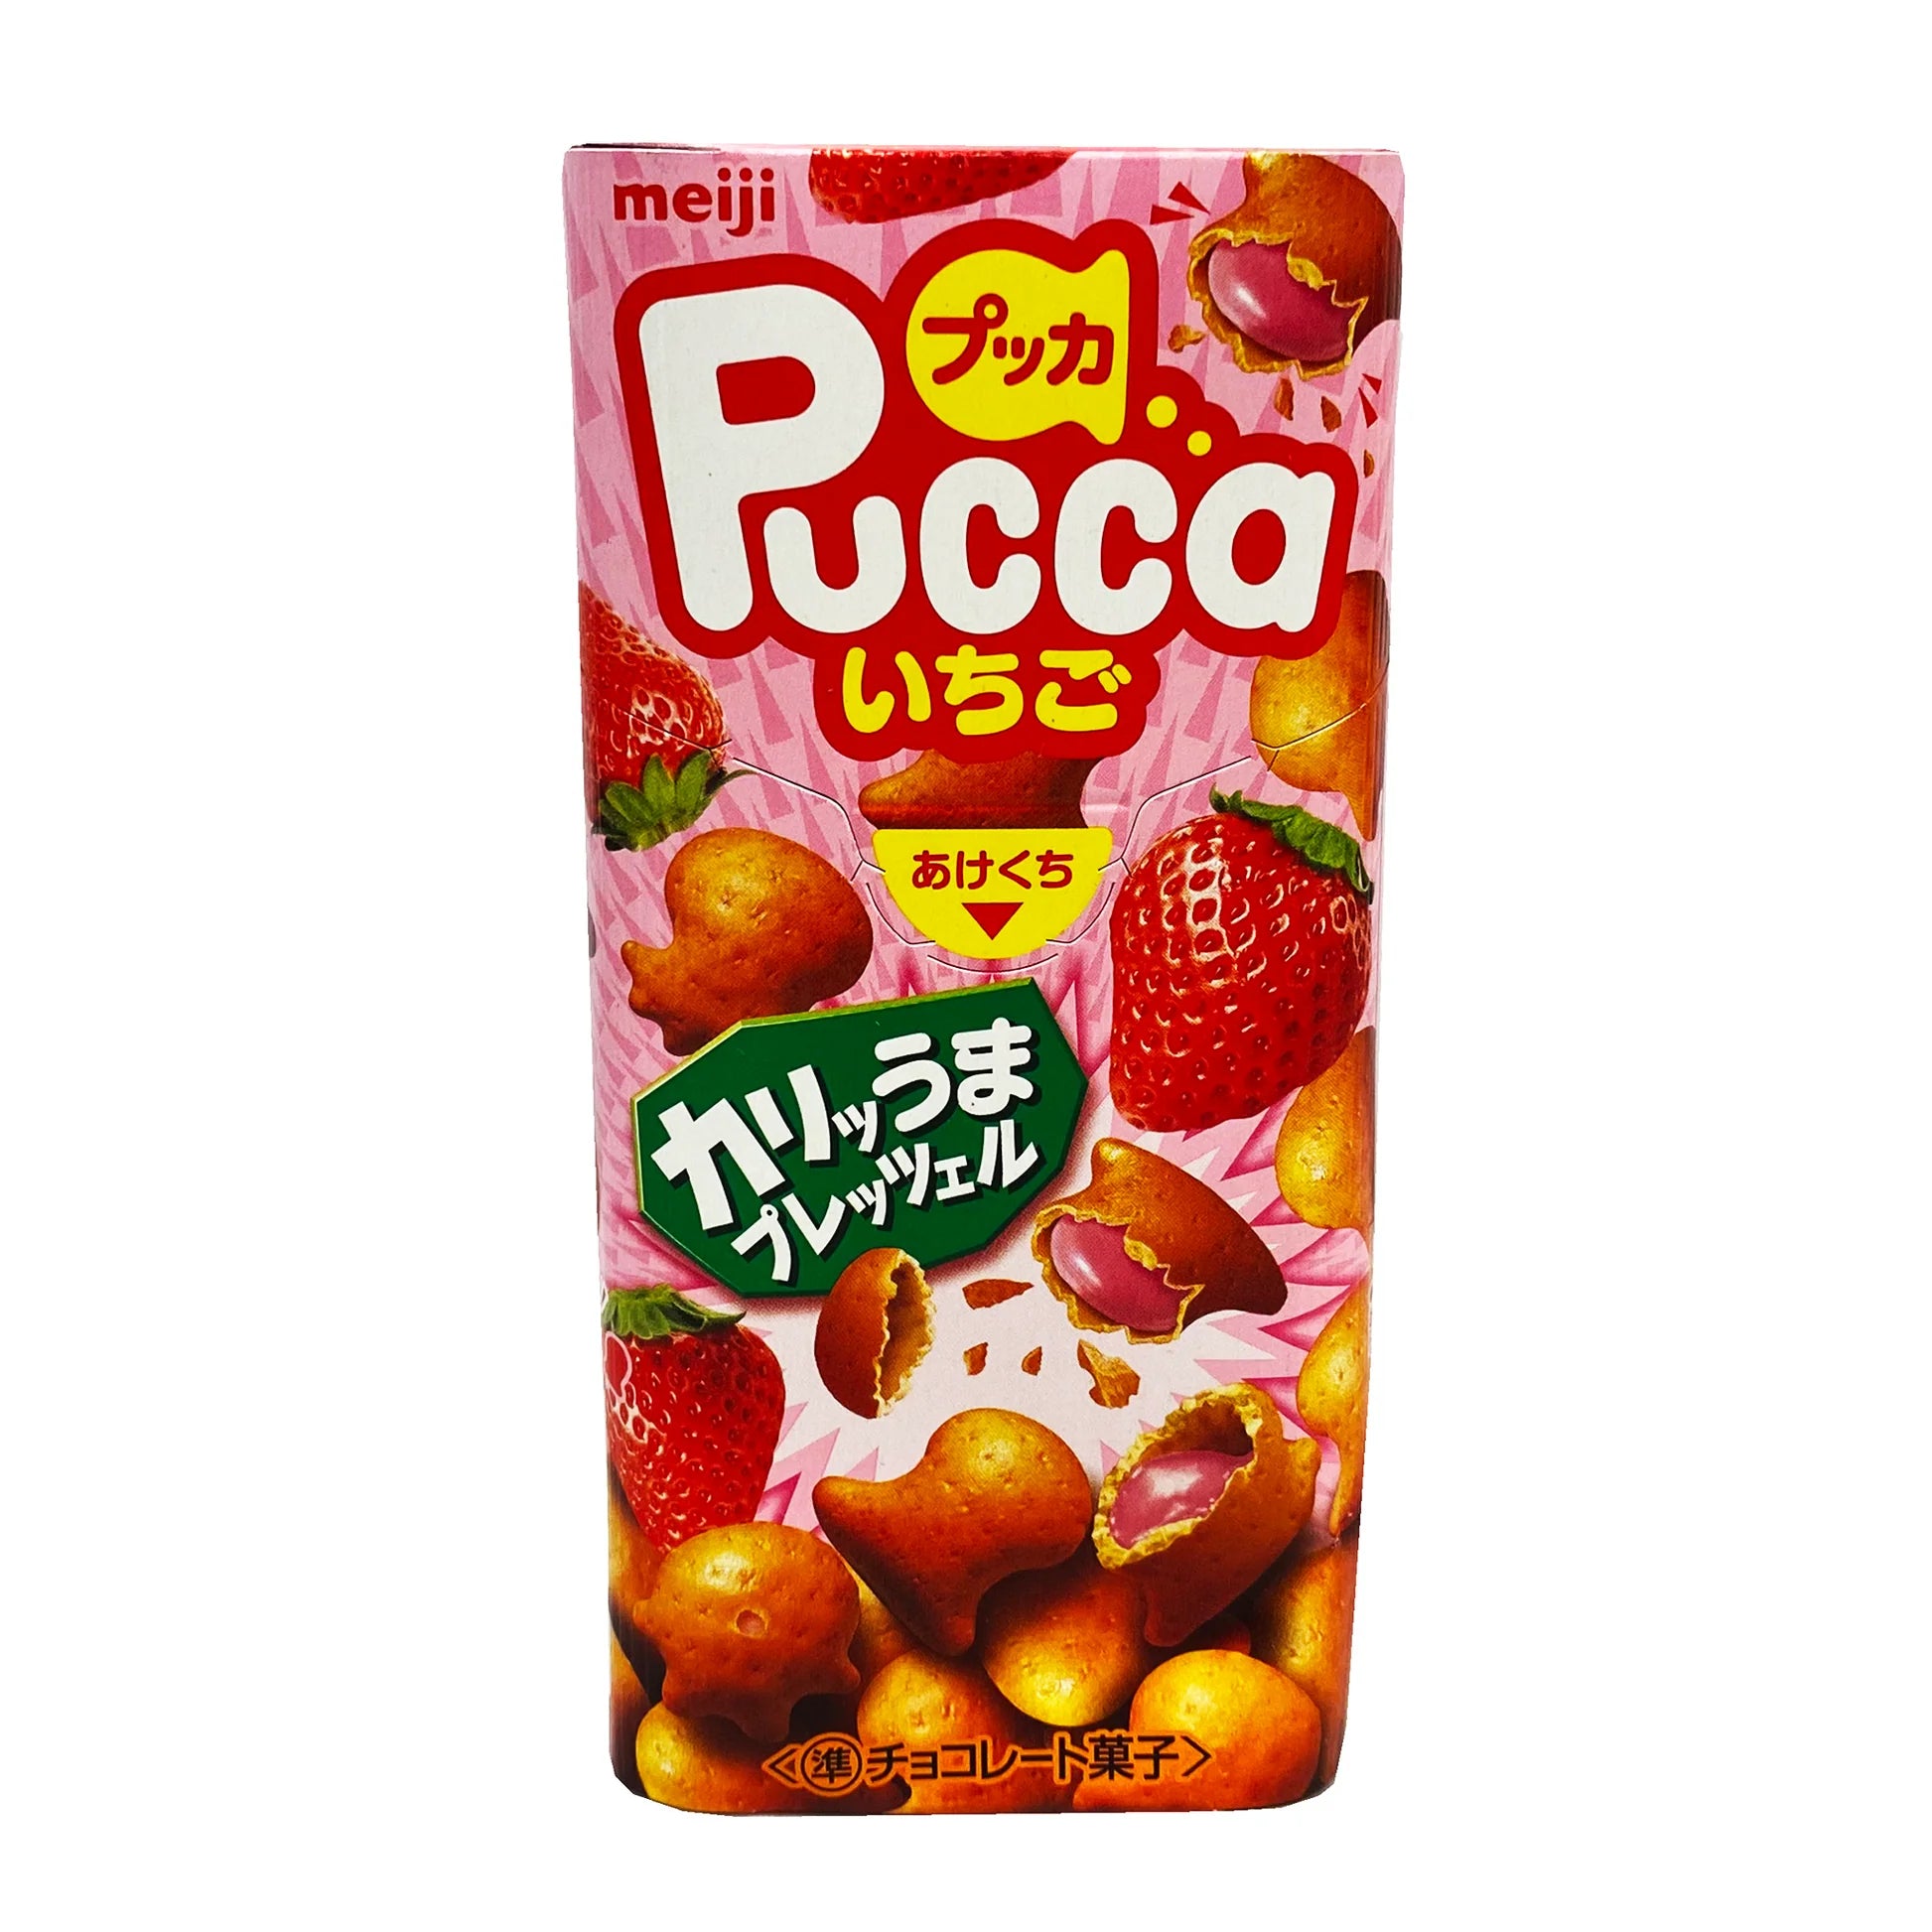 Meiji Pucca Biscuits Strawberry (Japan)